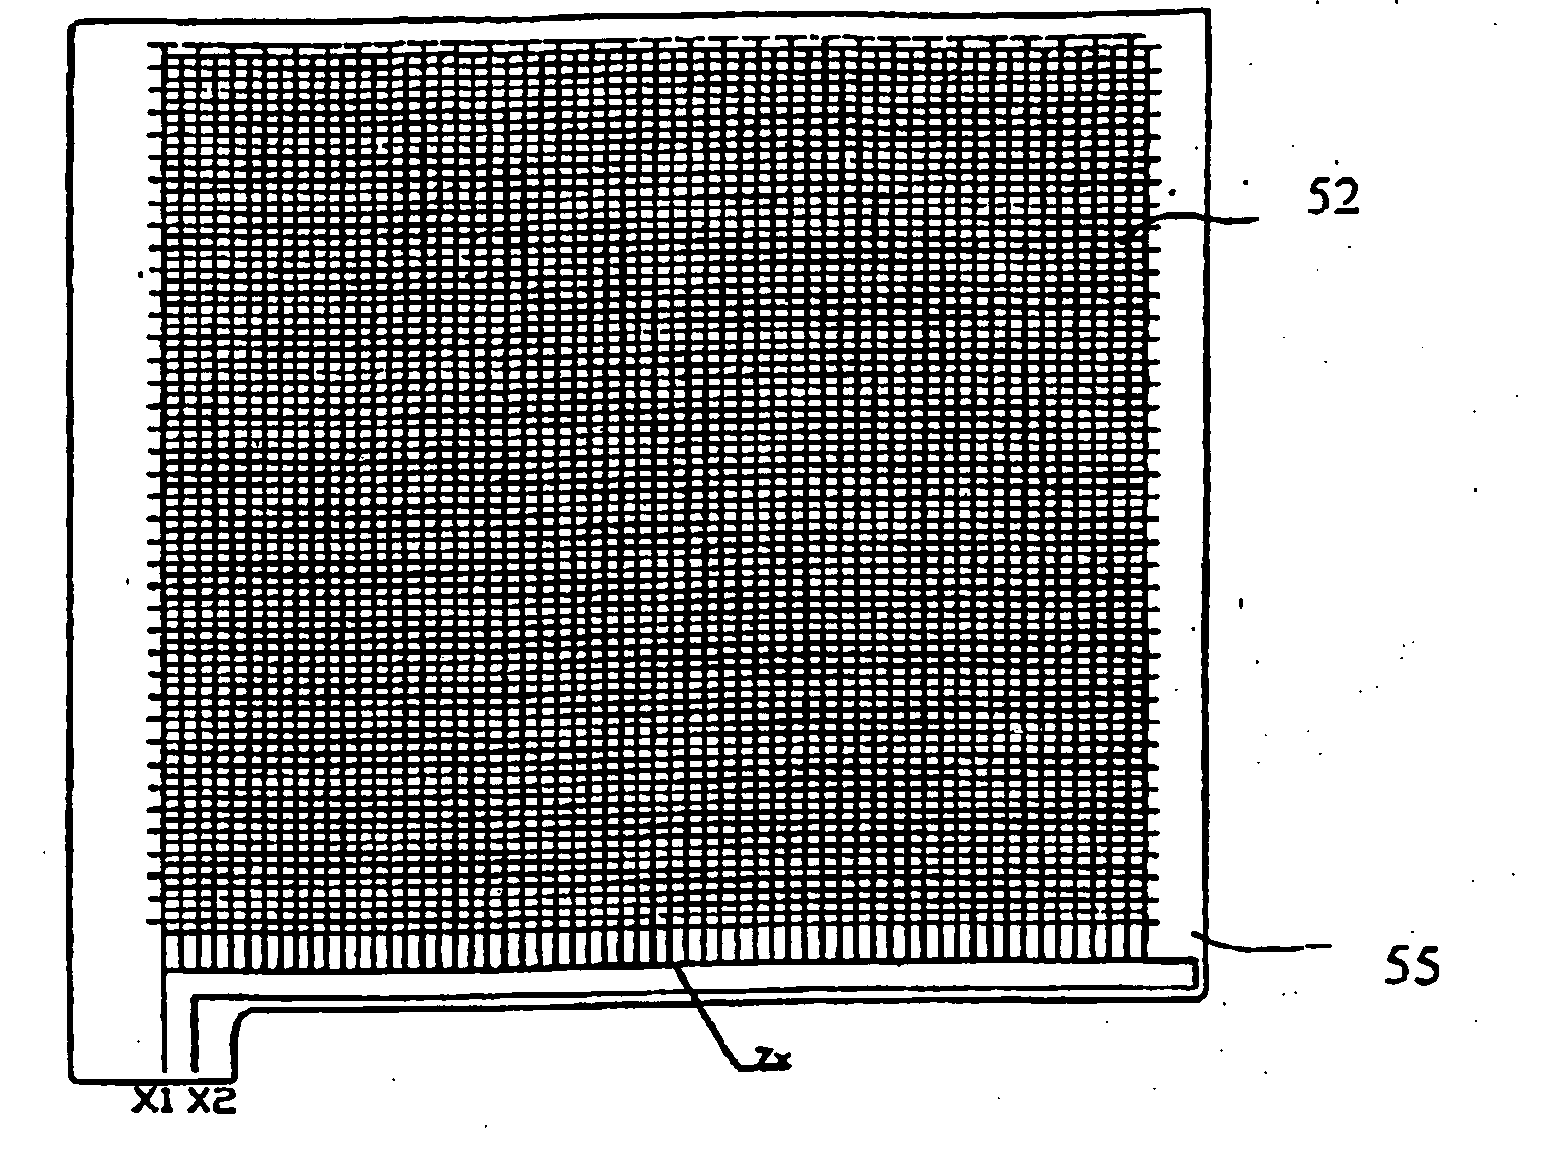 Touch control display screen with a built-in electromagnet induction layer of septum array grids